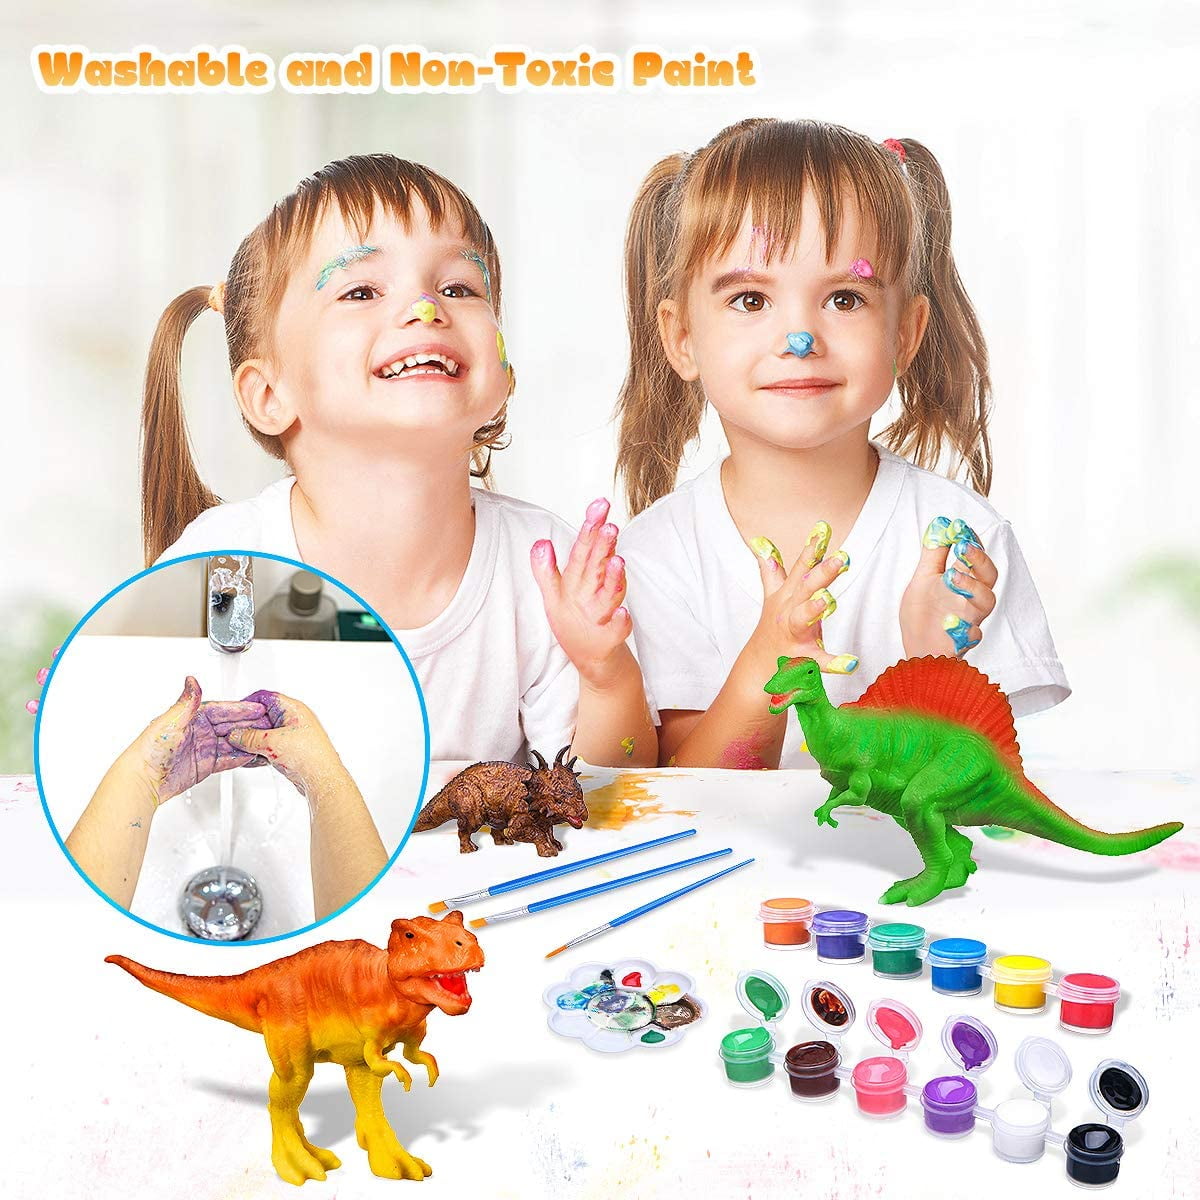 Nene Toys Dinosaur Painting Kit for Kids 3-7 [The Rulers of North America]  – Art and Craft Toy to Paint with 4 Replicas, 10 Paints, 2 Brushes